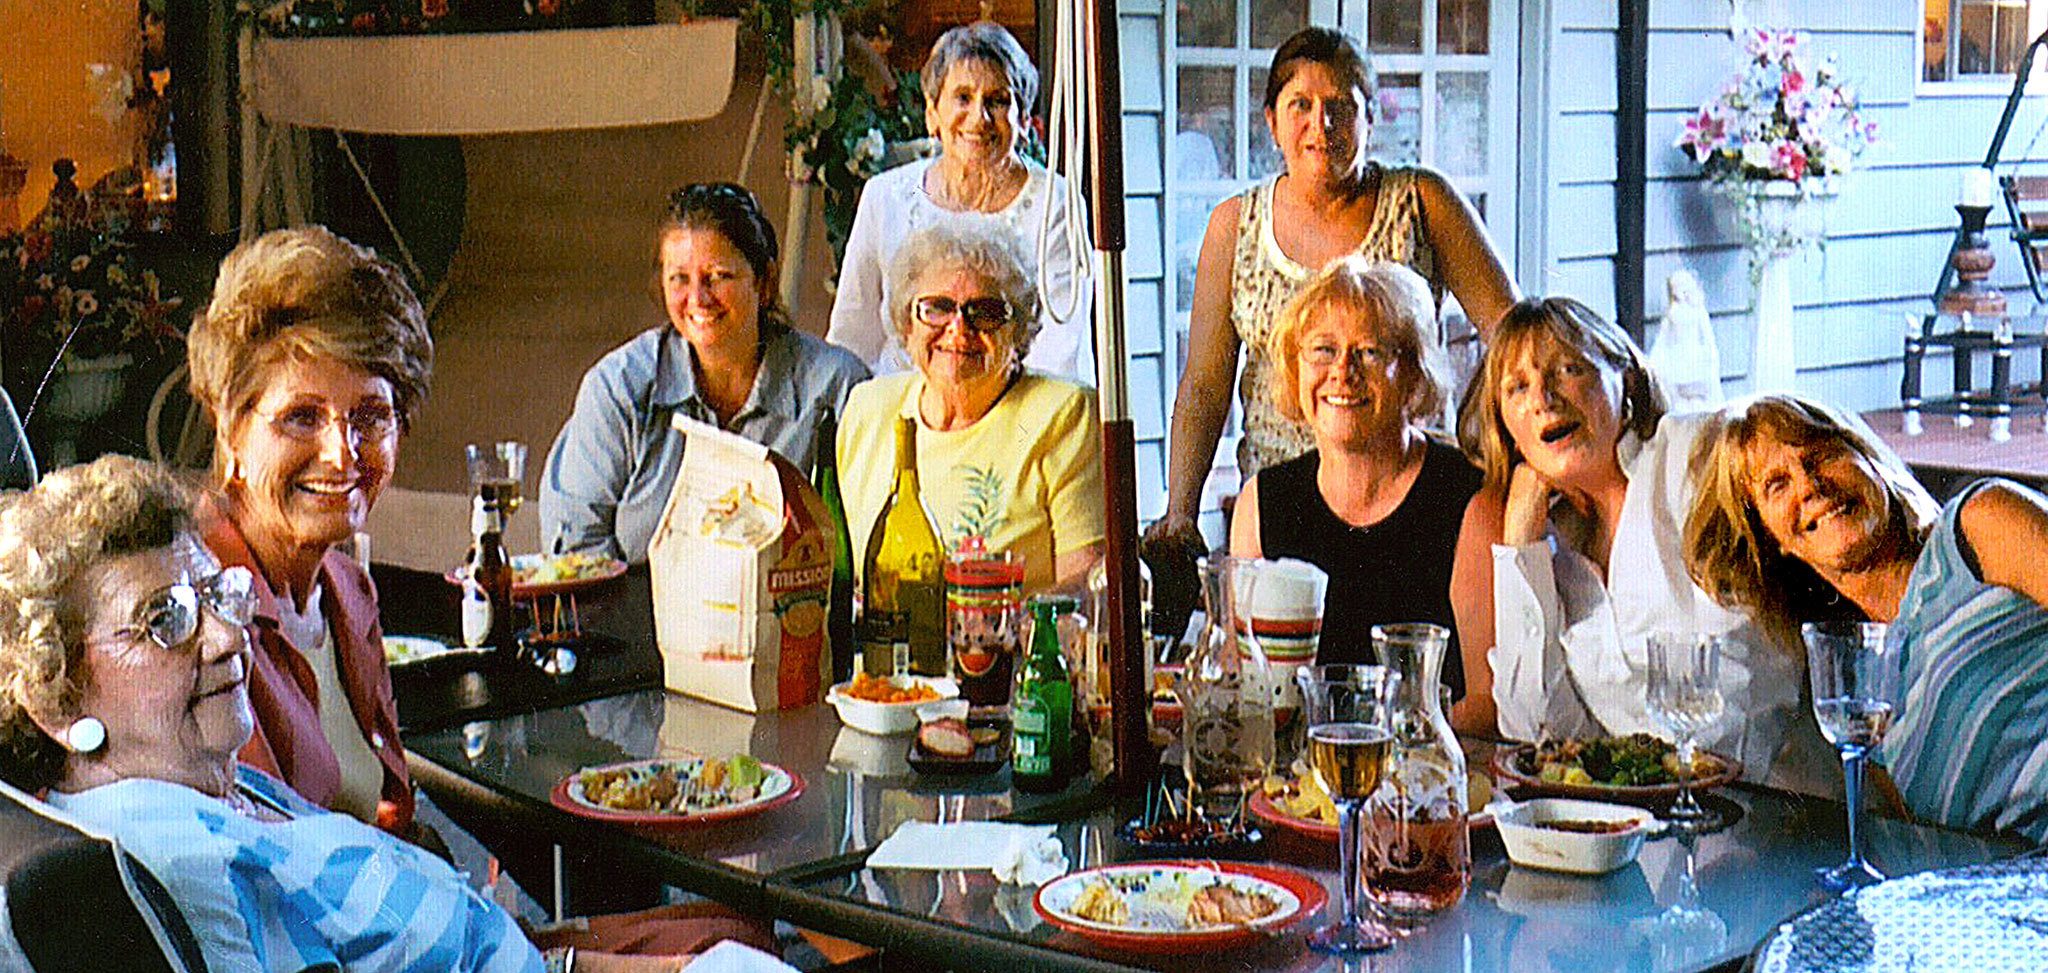 The “Bonnettes,” a group of former downtown Everett Bon Marche employees, at one of their monthly gatherings. Pictured are (from left): Marvel Cummings, Edythe Pavish, Lisa Amundson, the late Goldie Backlezos (standing), Ruth Wilson, Connie Leese (standing), Mary Lou Jones, Kim Goebbert and Val Rude. (Contributed photo)